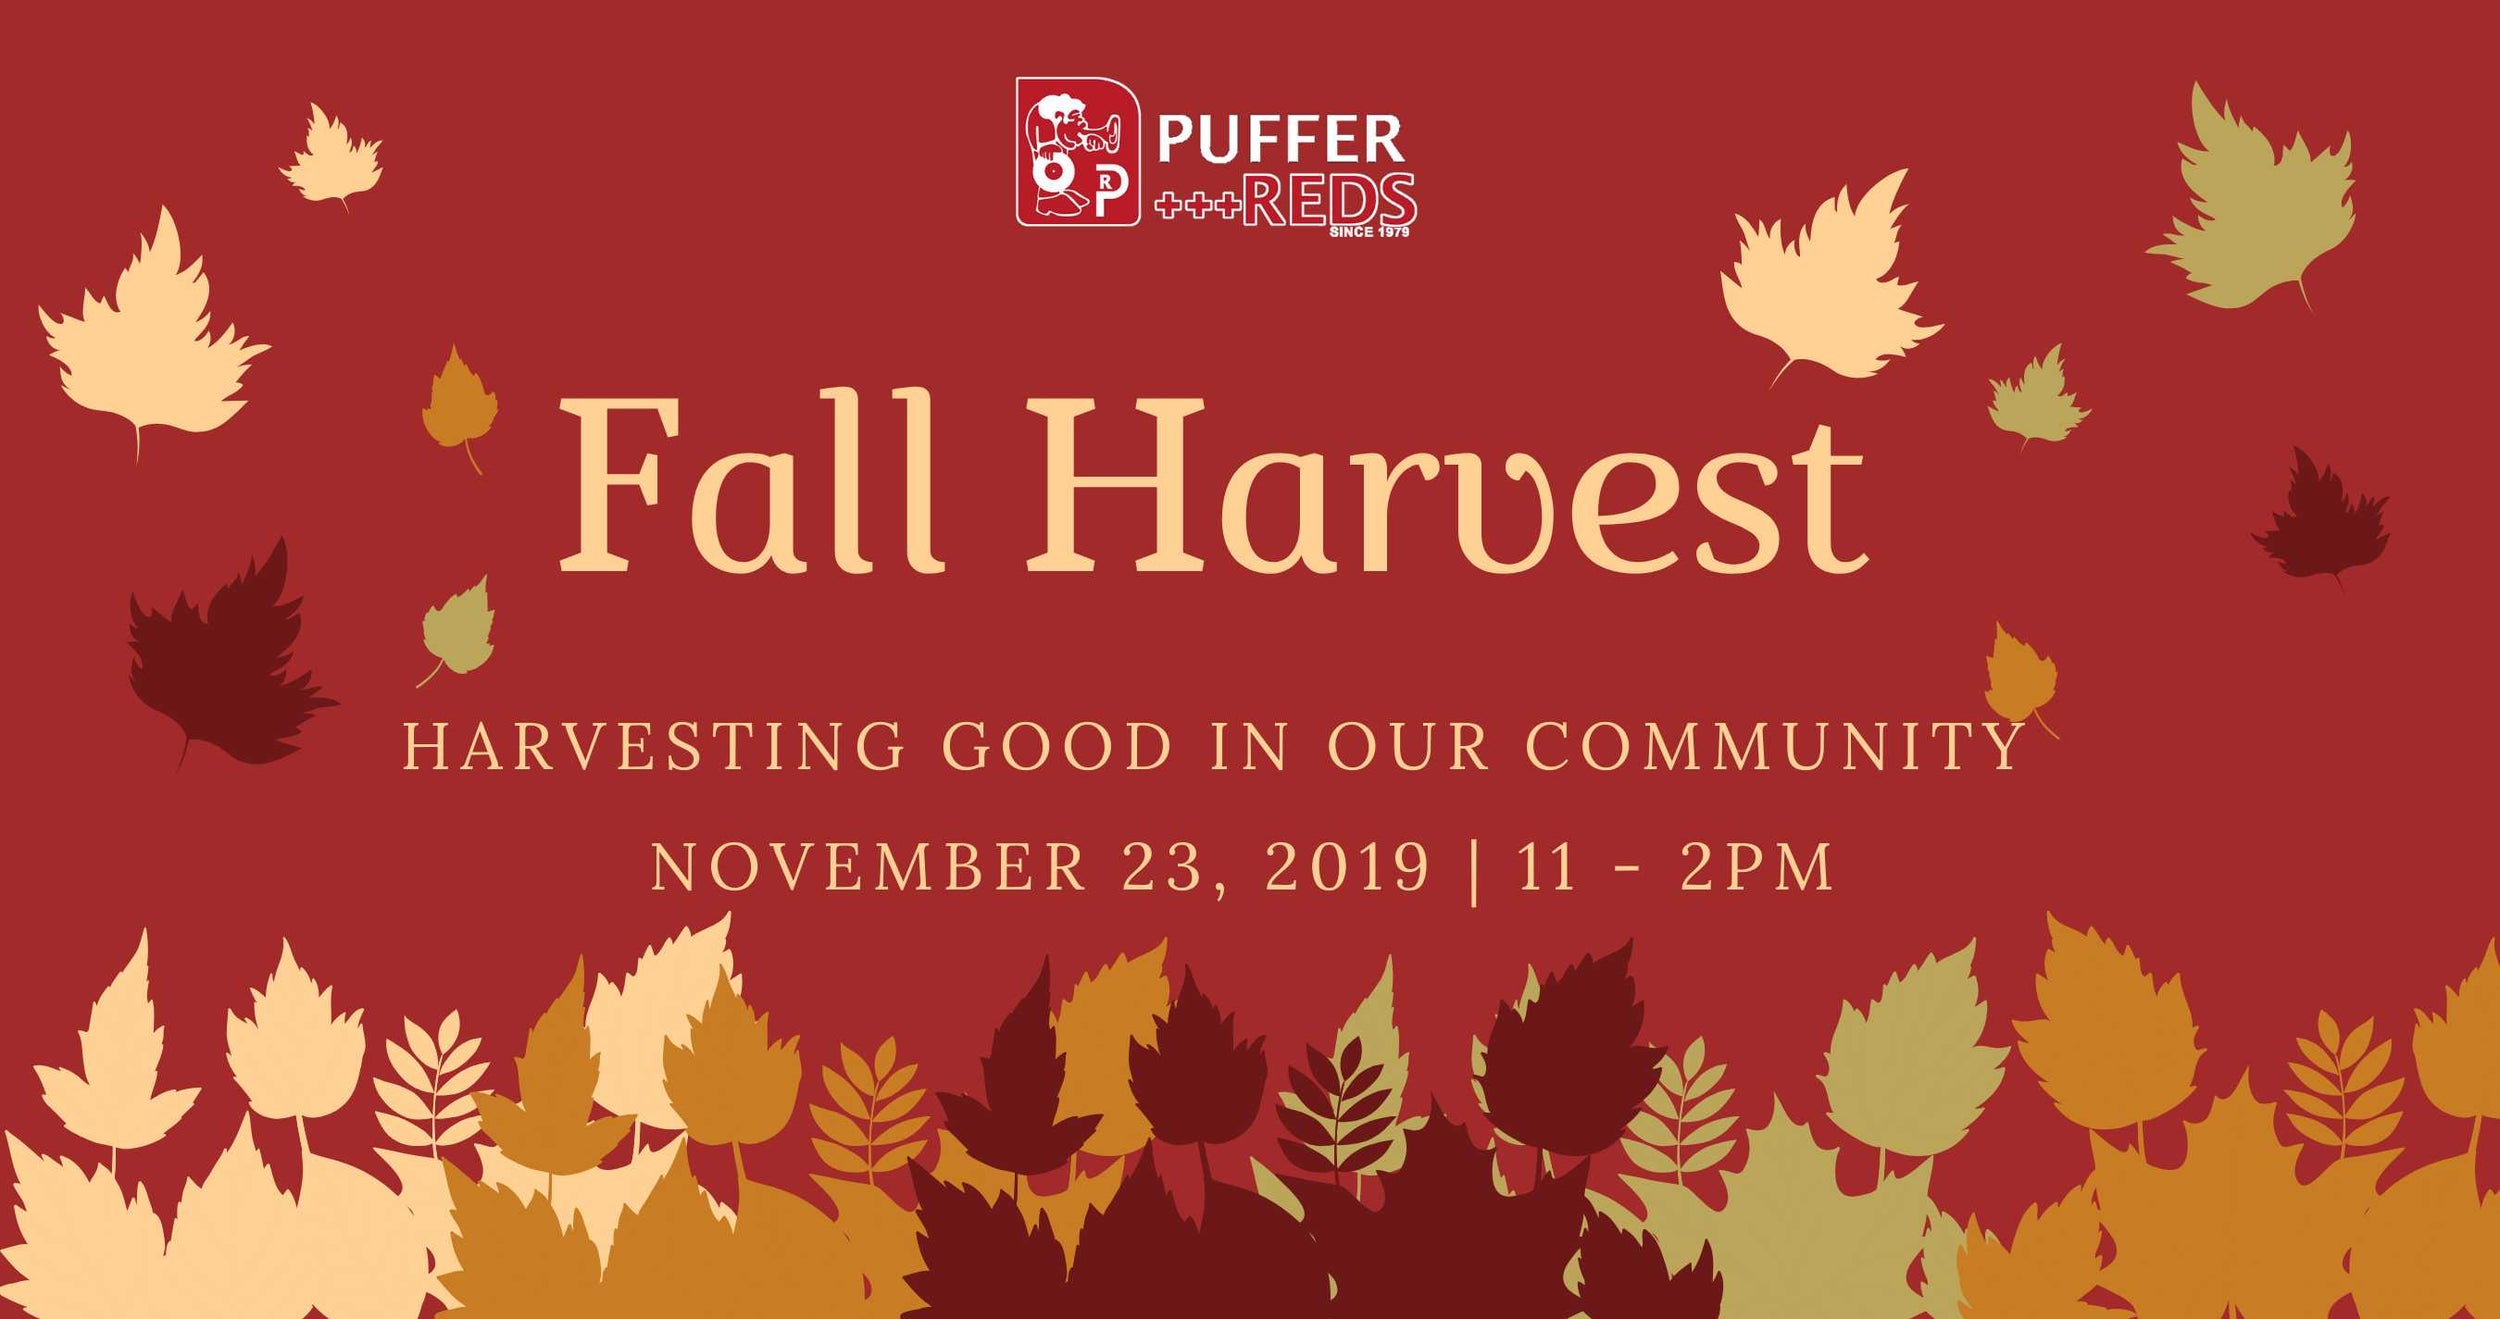 Fall Harvest: Harvesting Good in Our Community Puffer Reds